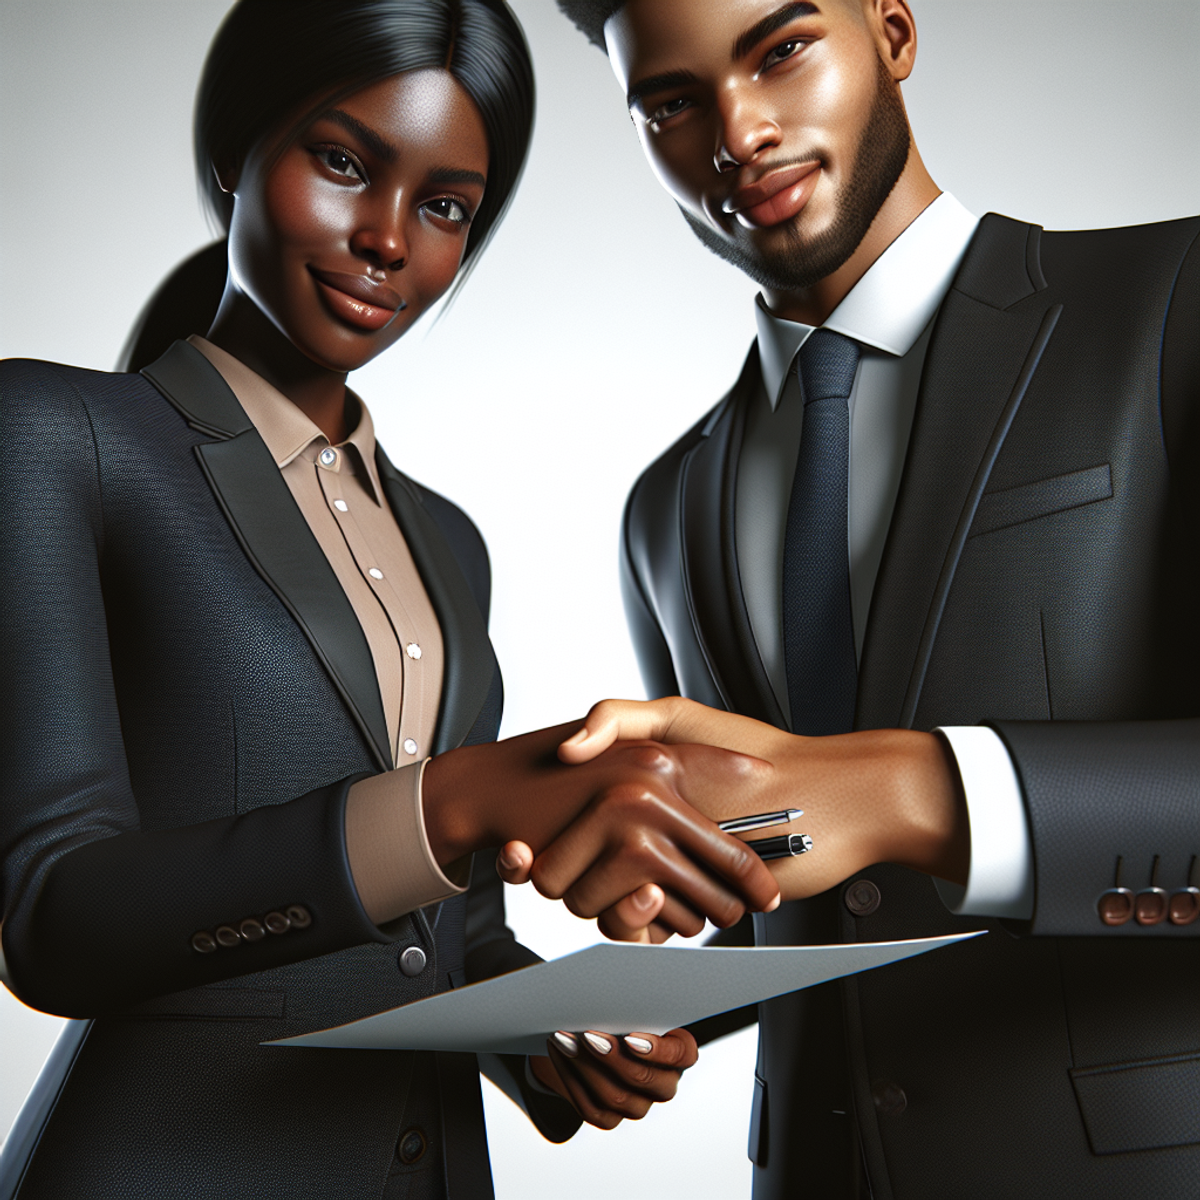 A Black woman and Hispanic man in business attire shaking hands in agreement.